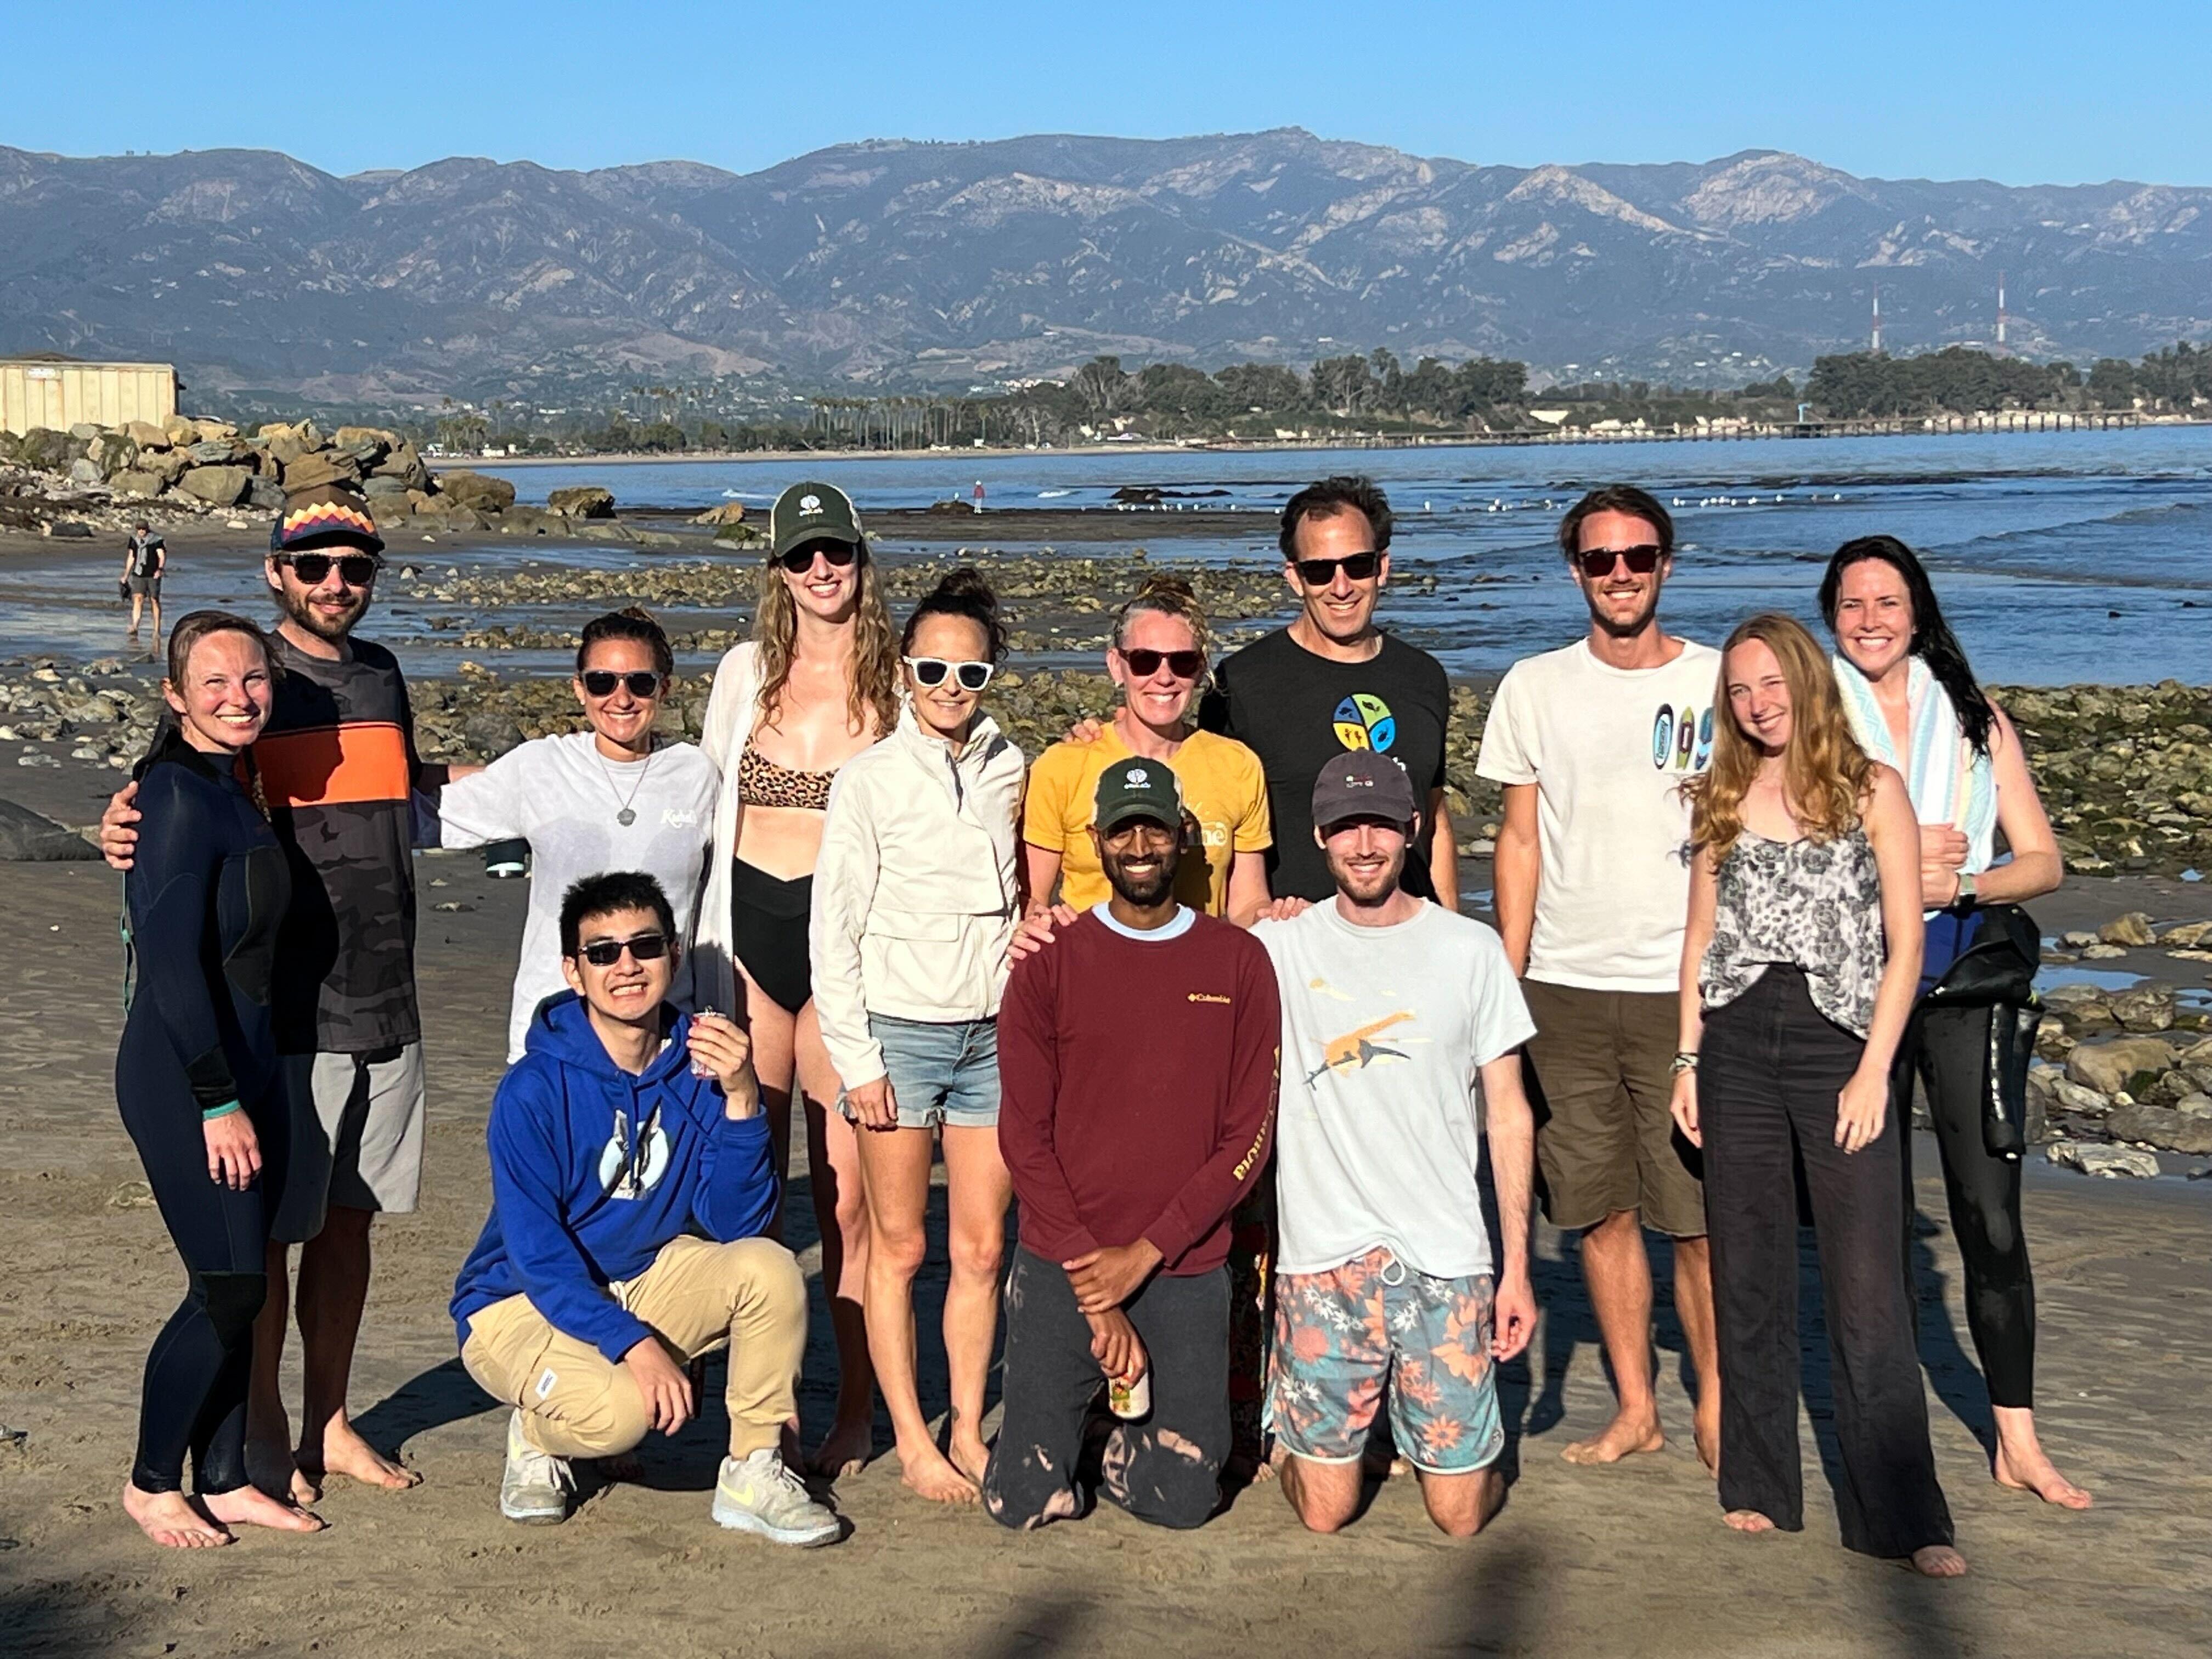 emLab team at the beach with mountains in the background